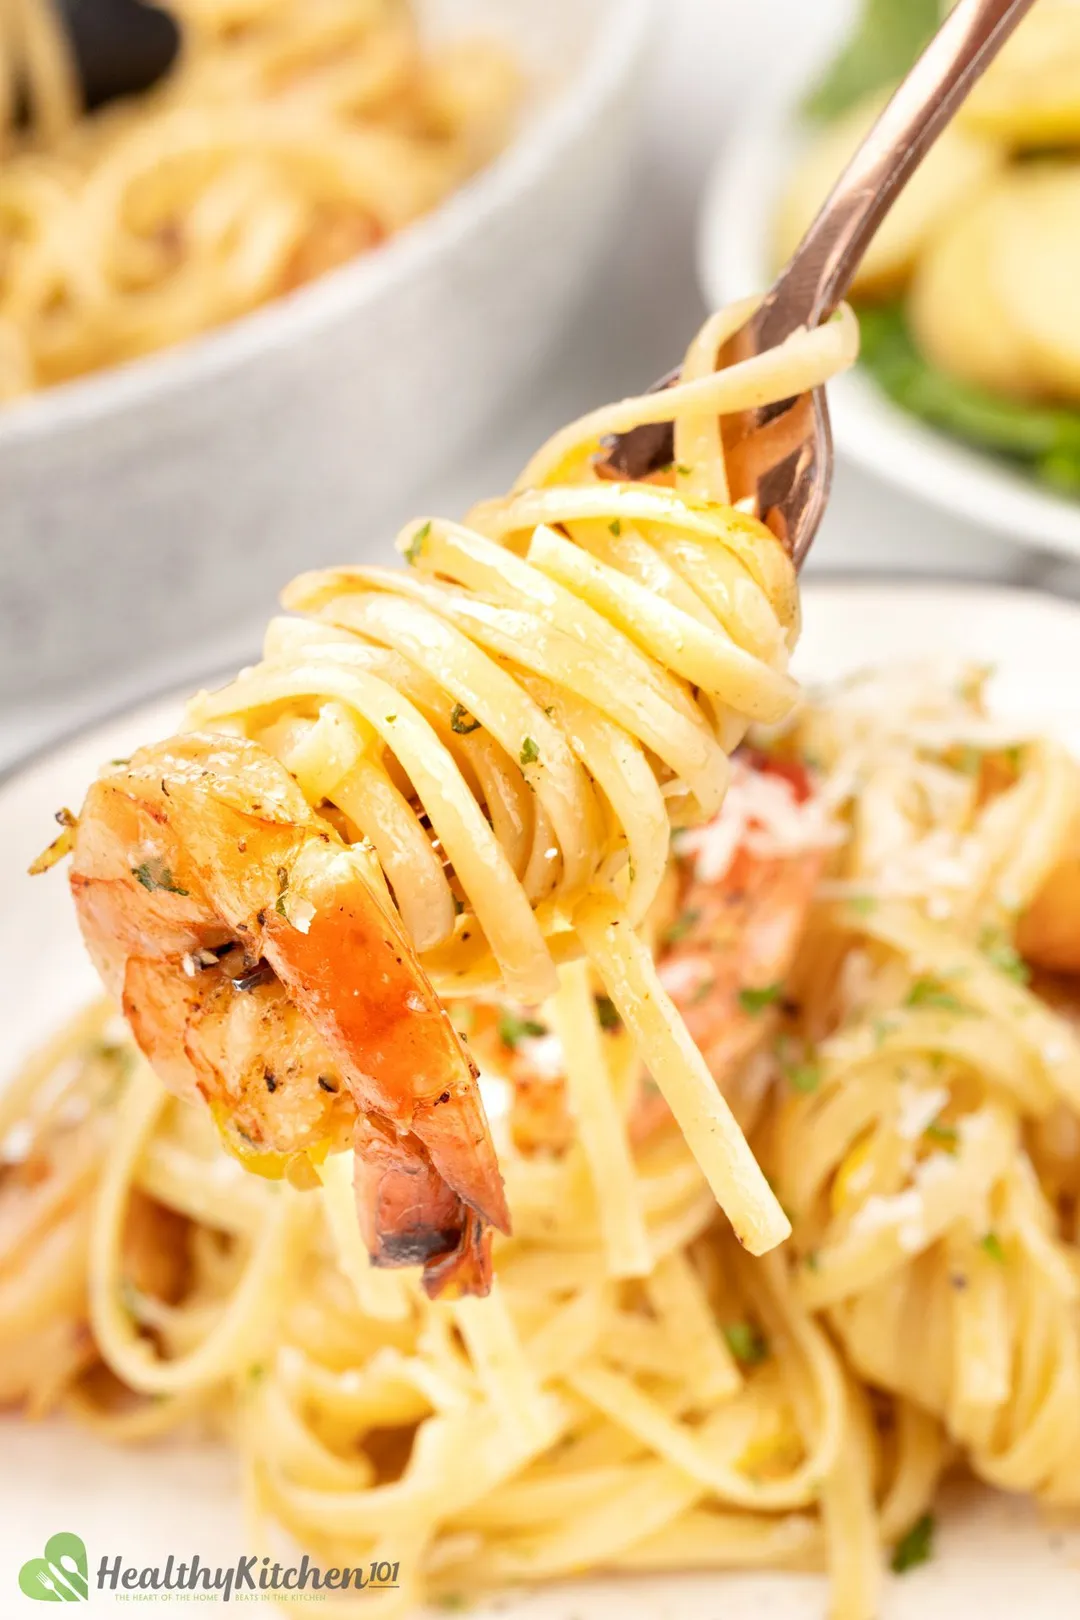 A close-up shot of fettuccine, shrimp, and shaved parmesan on top, with a salad in the background